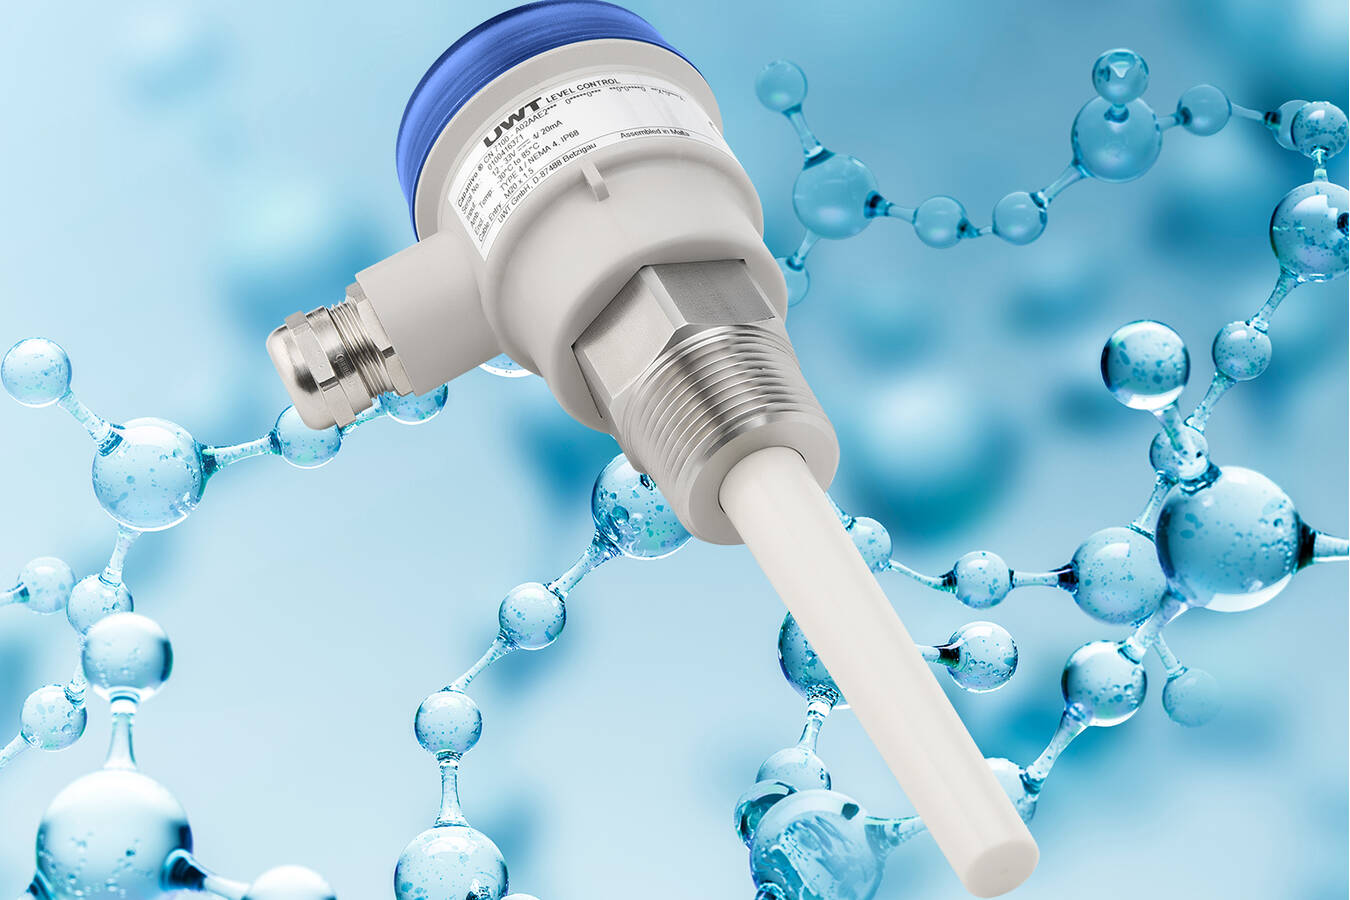 Capacitive level measurement with the robust PPS probe and SensGuard protective sleeve